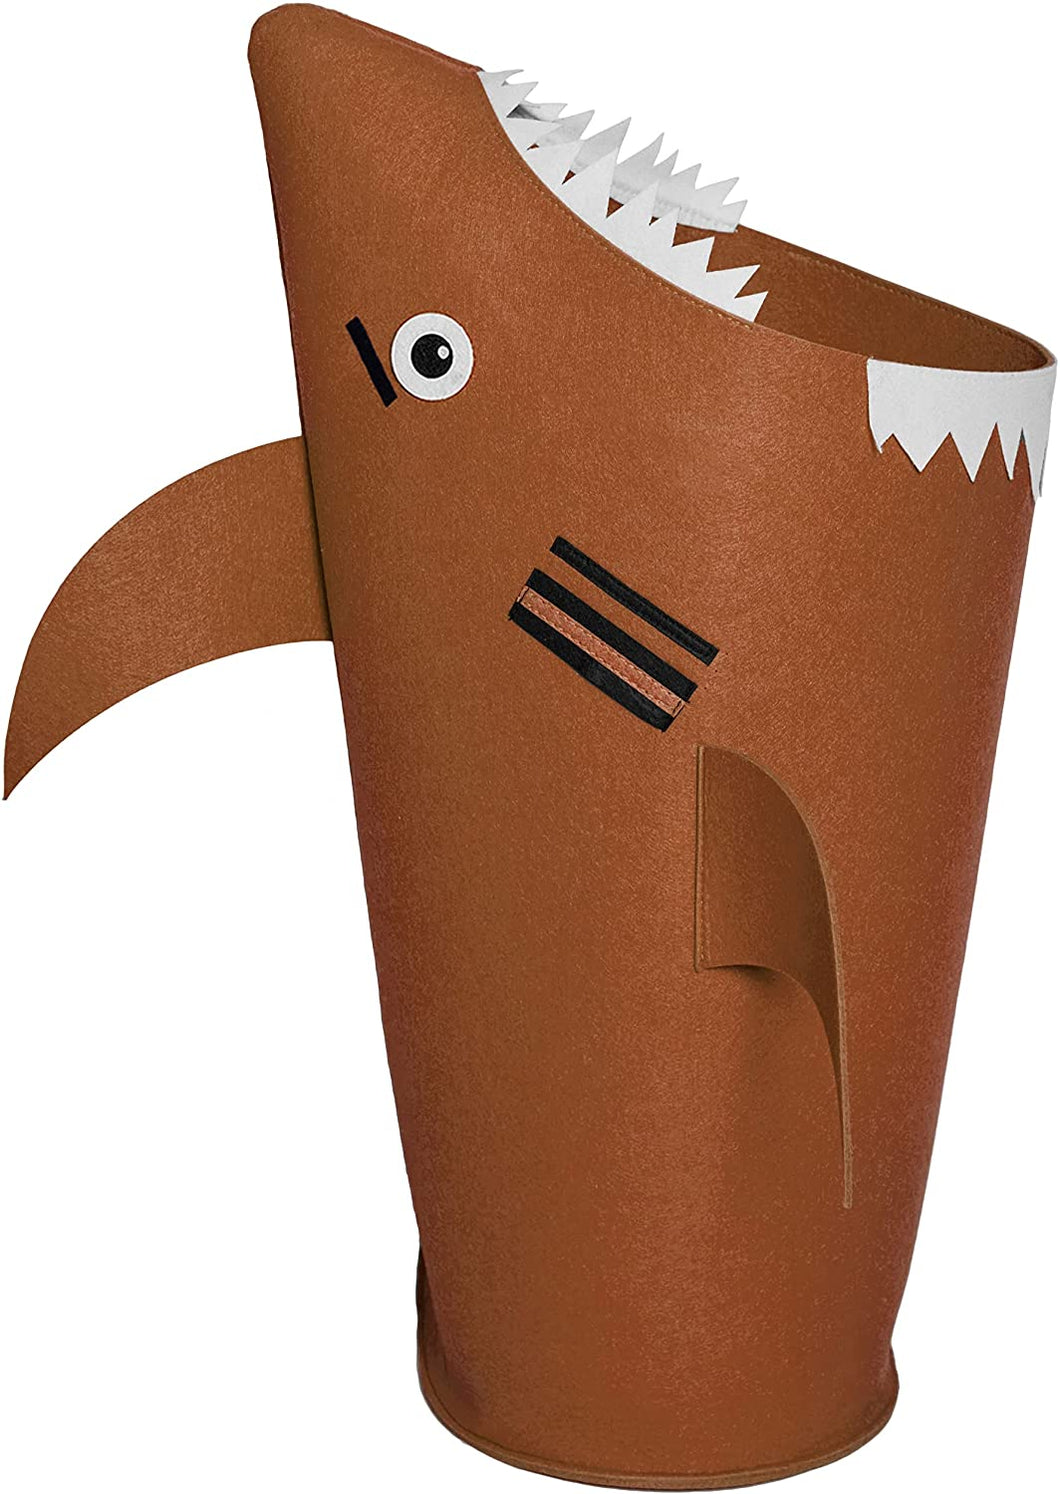 Baby Shark Laundry Basket for Kids for bedroom and bathroom - Brown